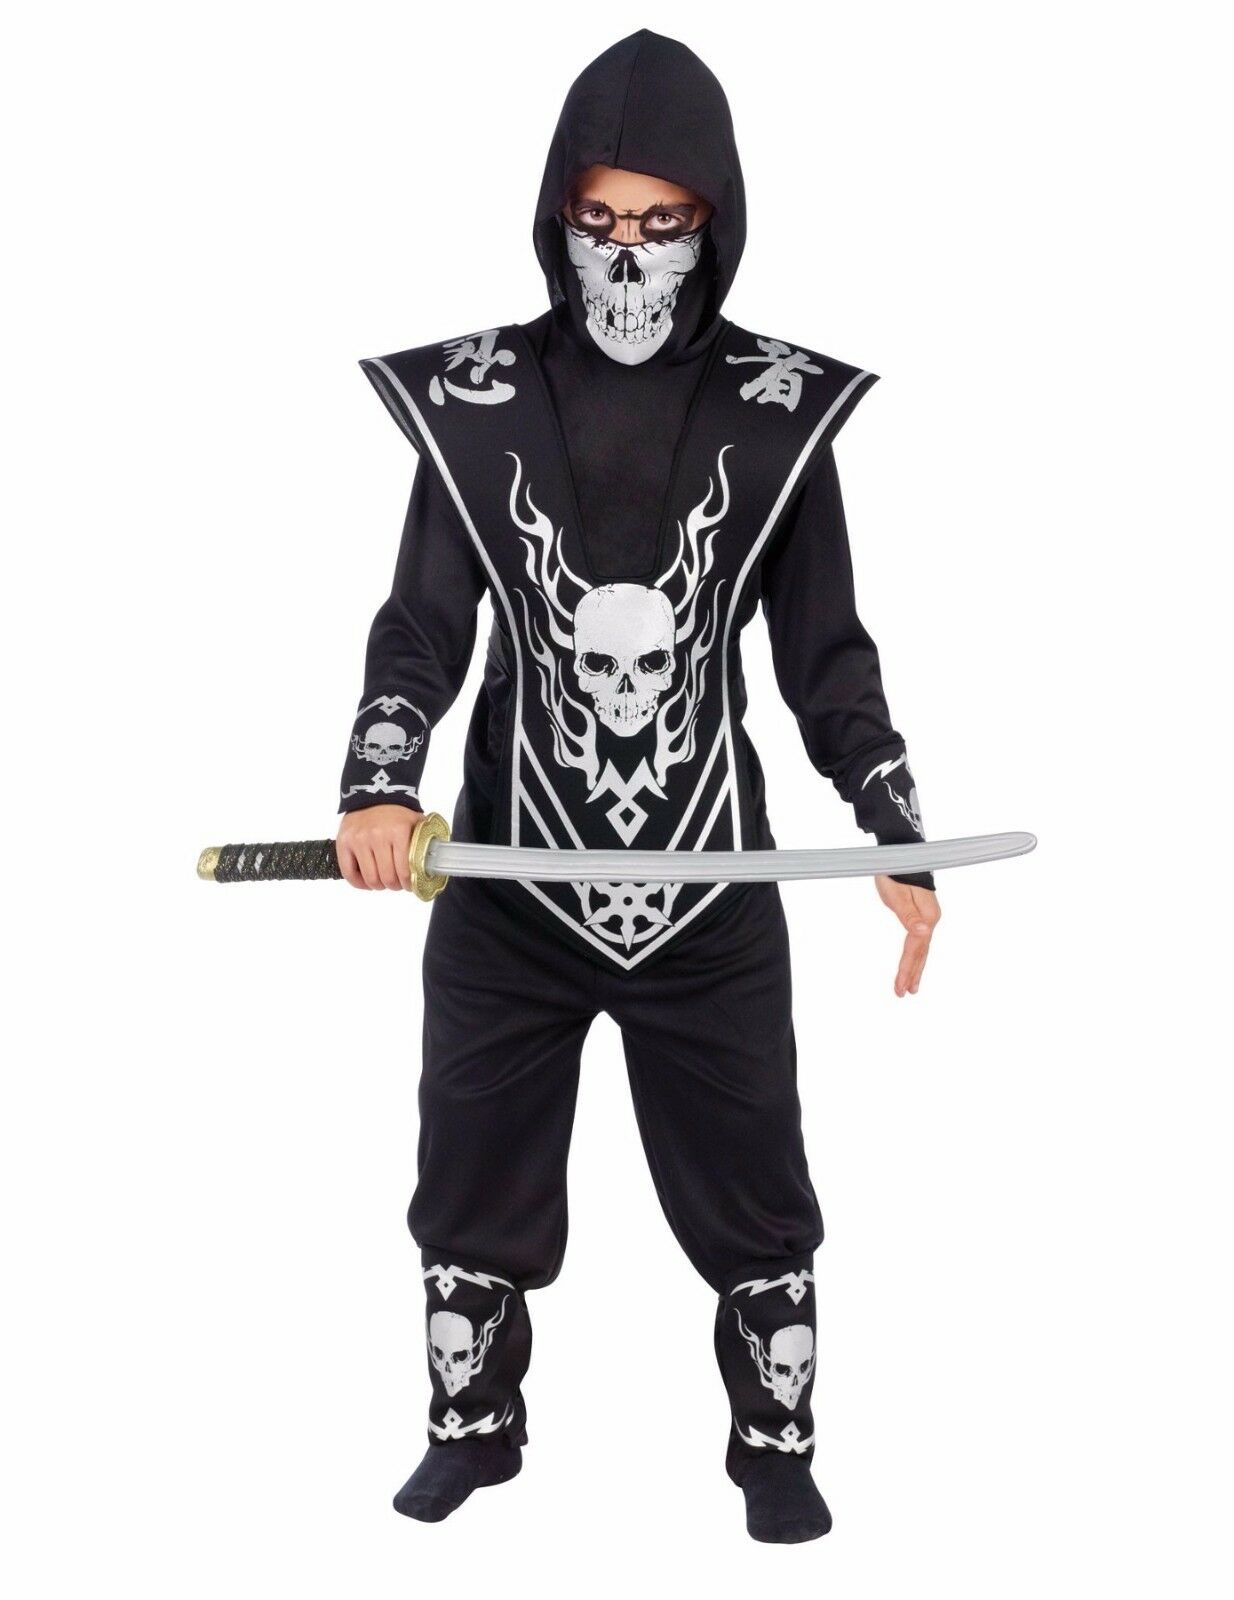 Skull Lord Ninja Fighter Warrior Child Costume, Black/Silver Hooded shirt Tunic Pants Skull face mask Two wrist guards Two shin guards